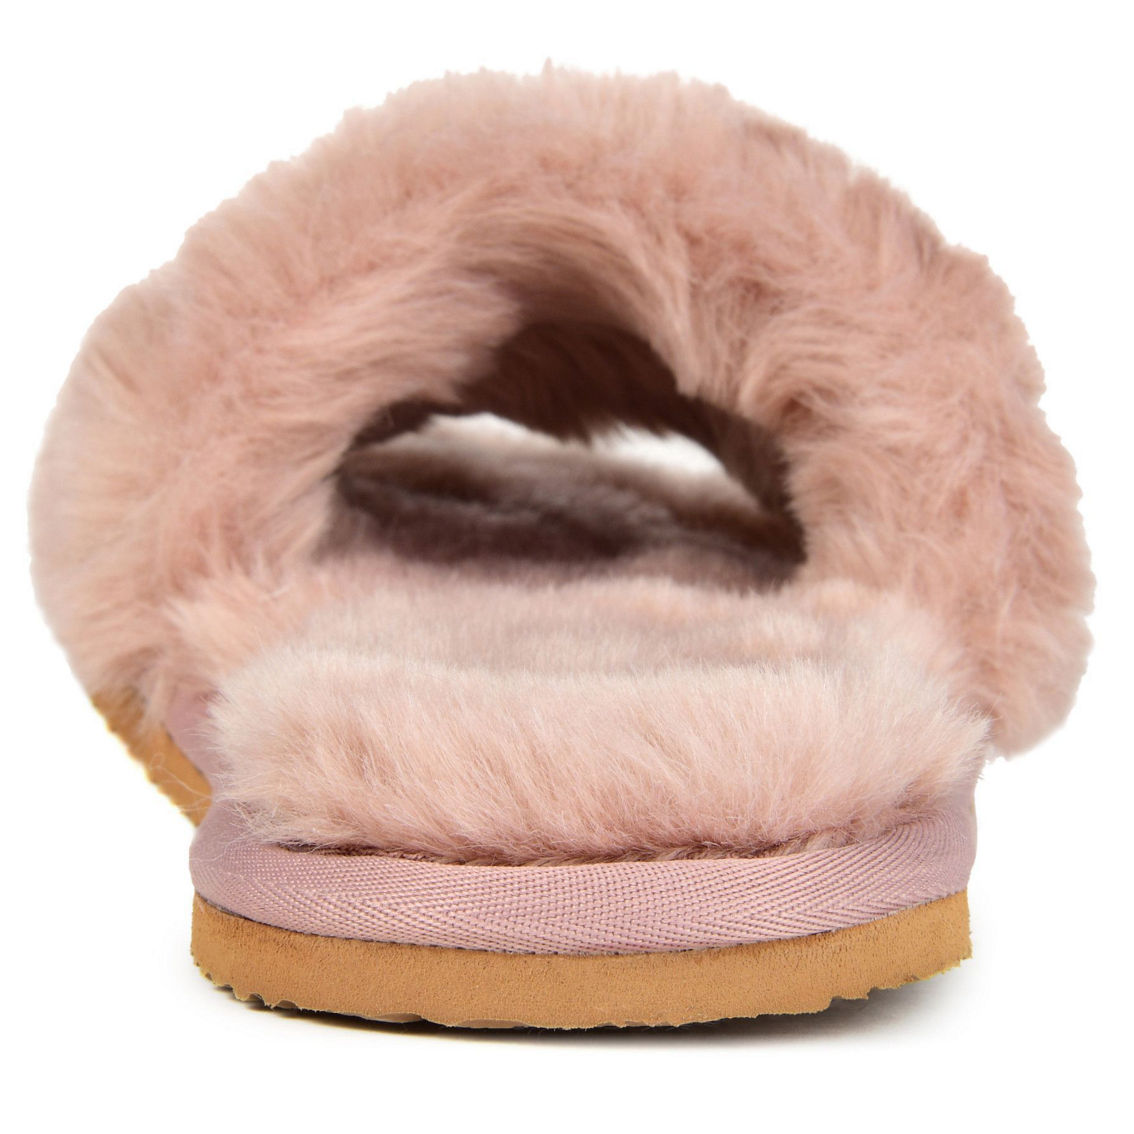 Journee Collection Women's Dawn Slipper - Image 3 of 5